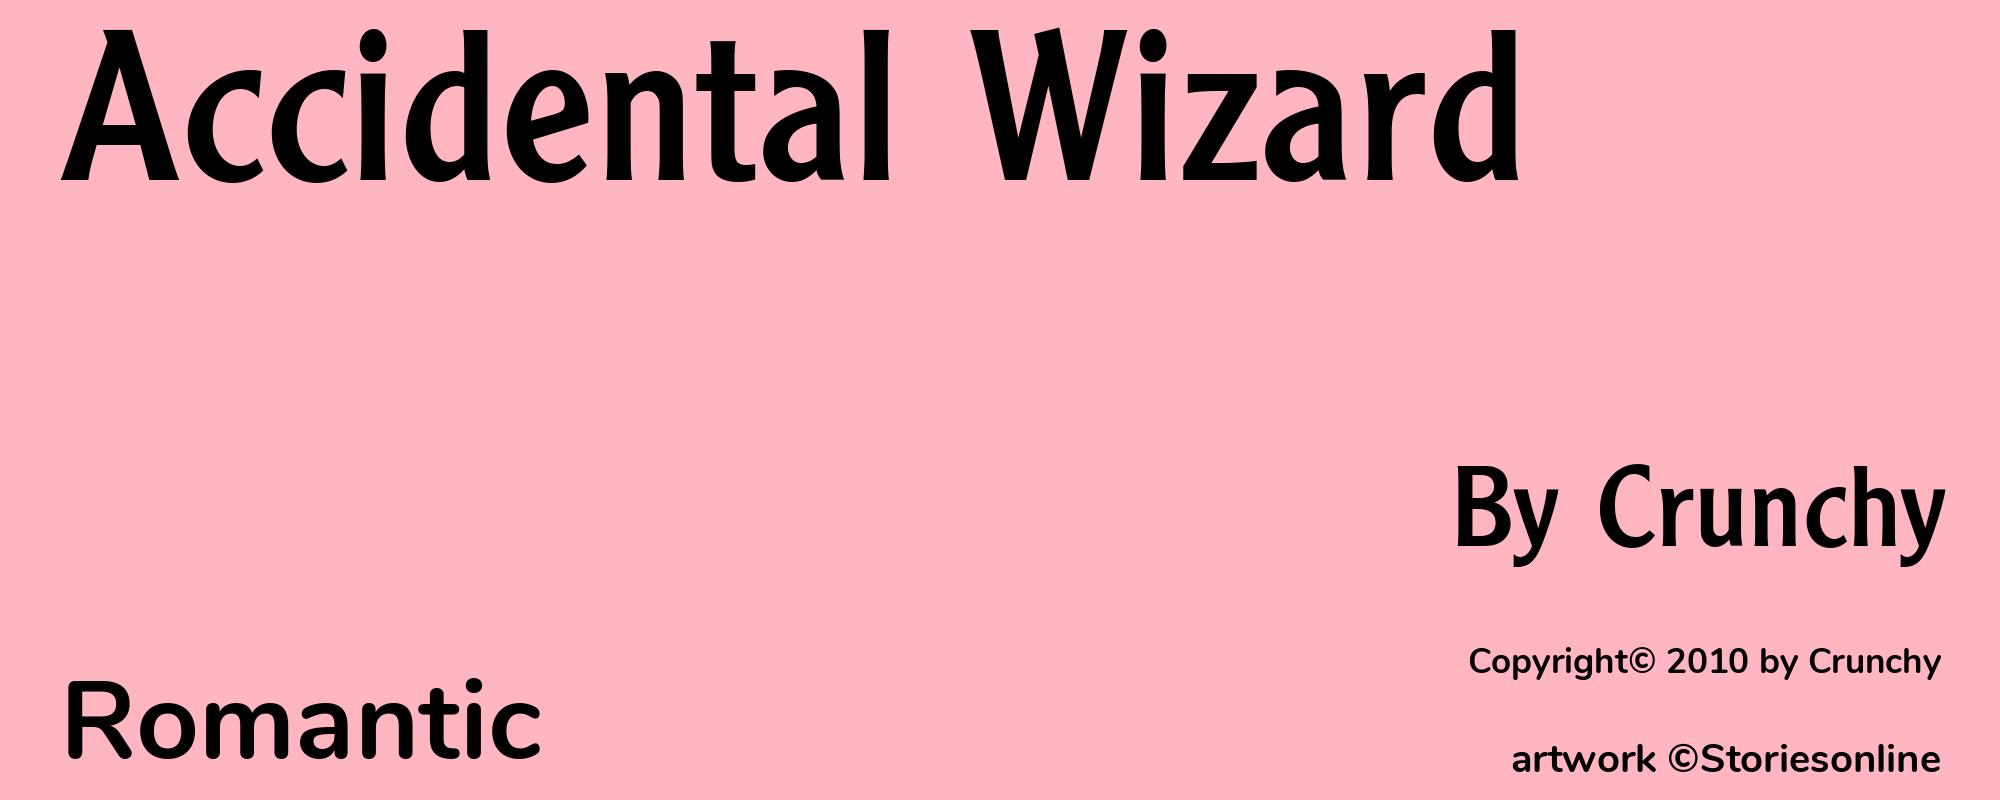 Accidental Wizard - Cover